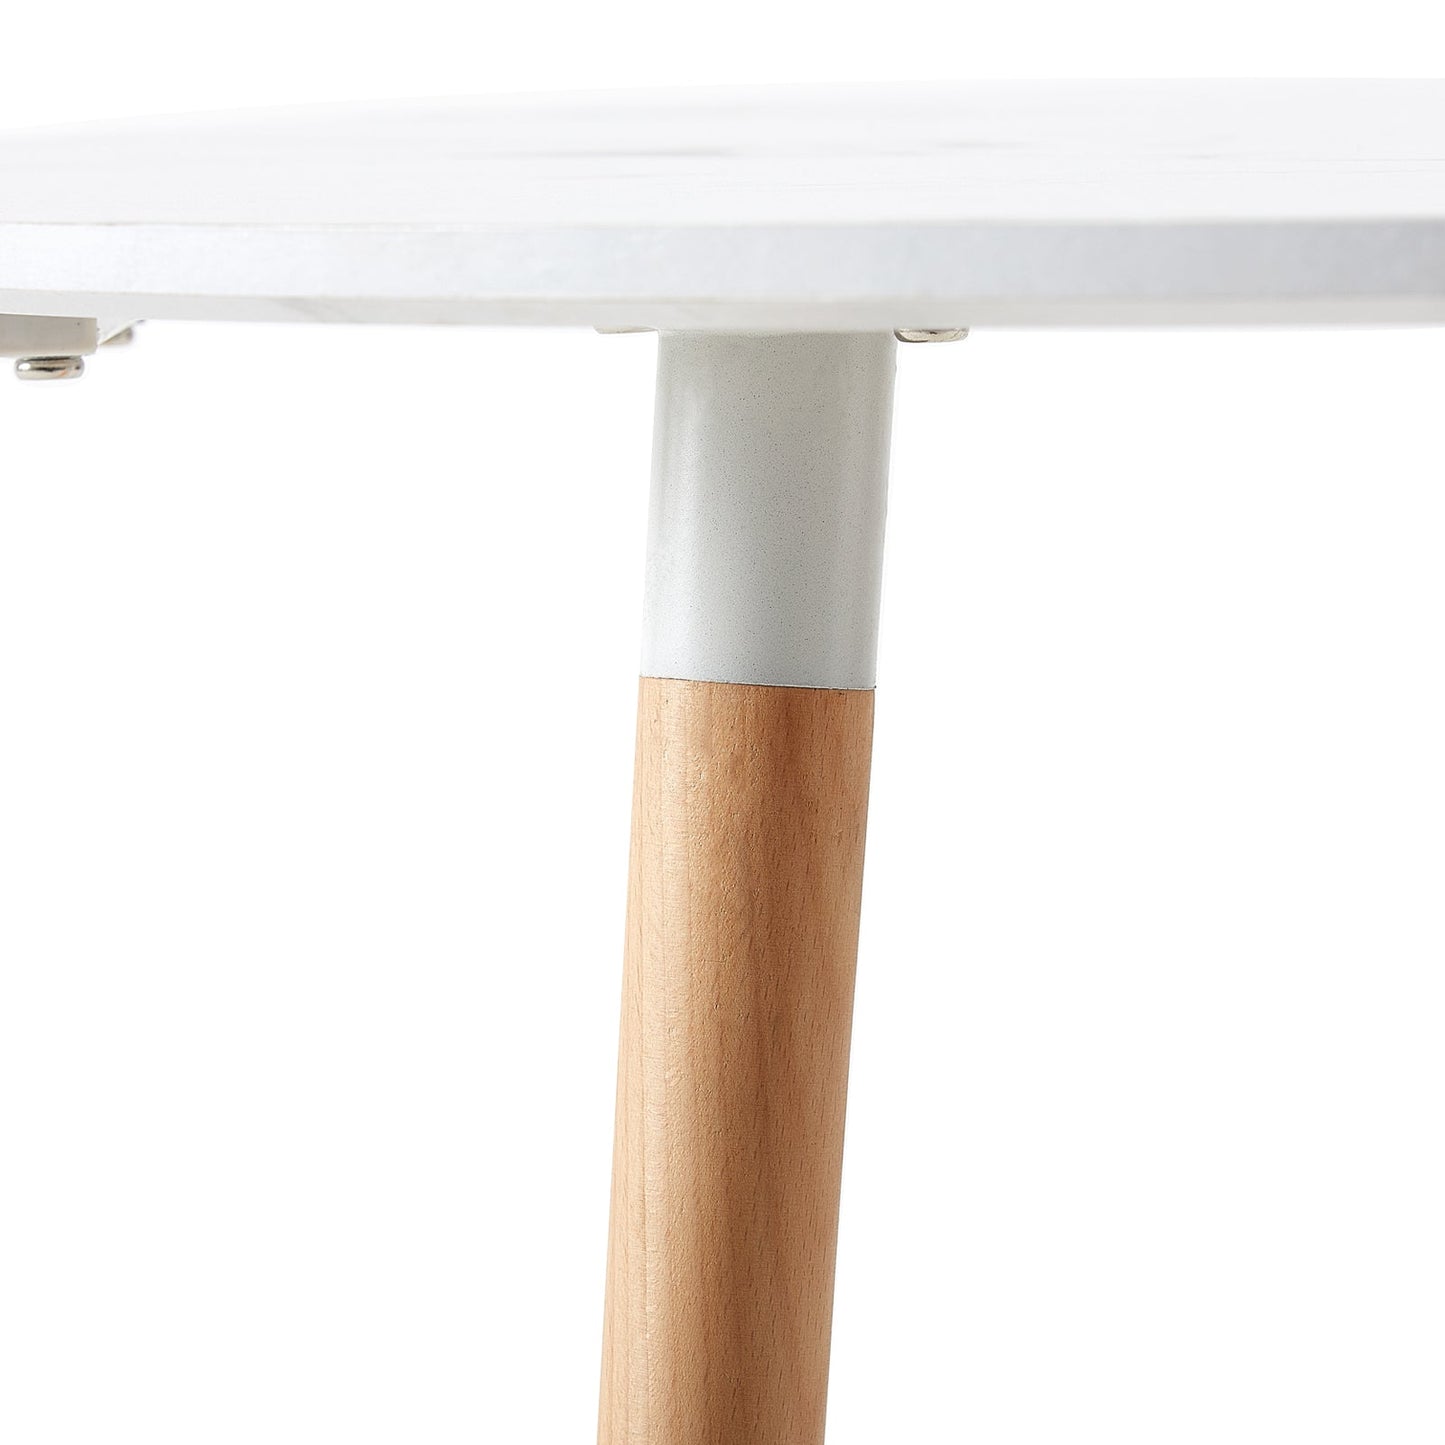 RONALD Nordic Style Round Dining Table